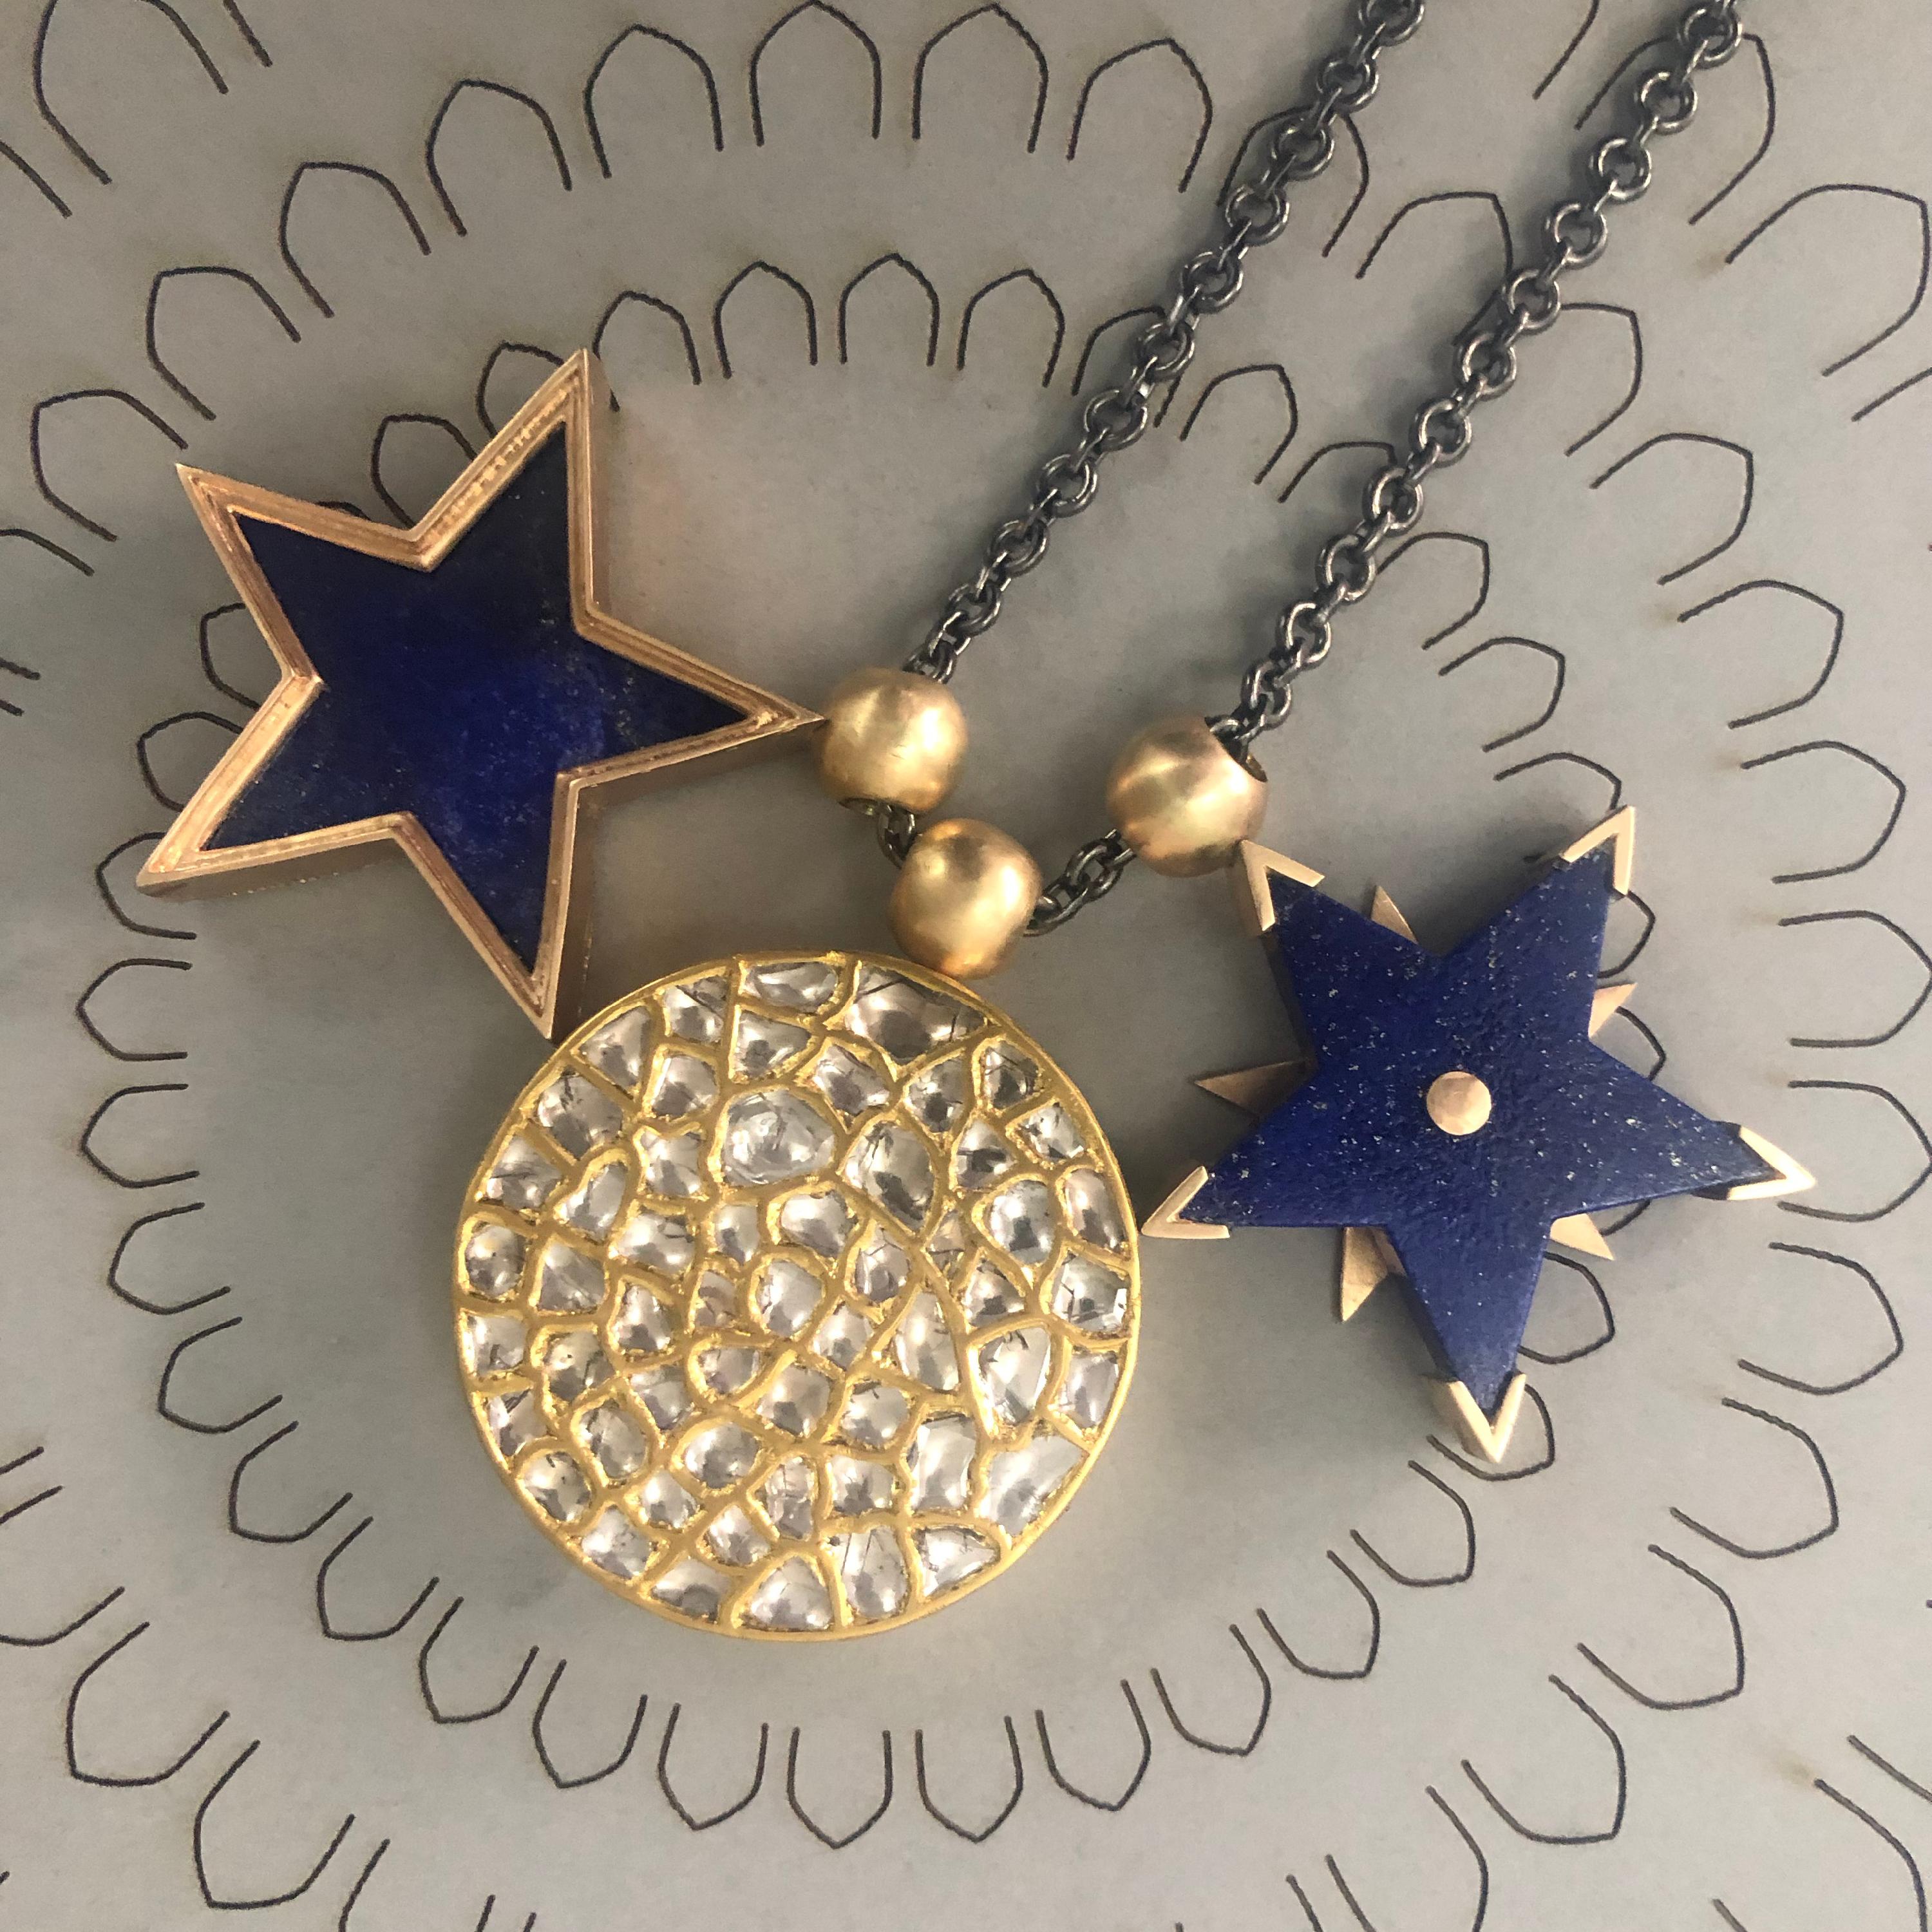 OUROBOROS Star Lapis Lazuli Spinning Pendant Handmade 18 Karat Gold Necklace In New Condition For Sale In London, GB